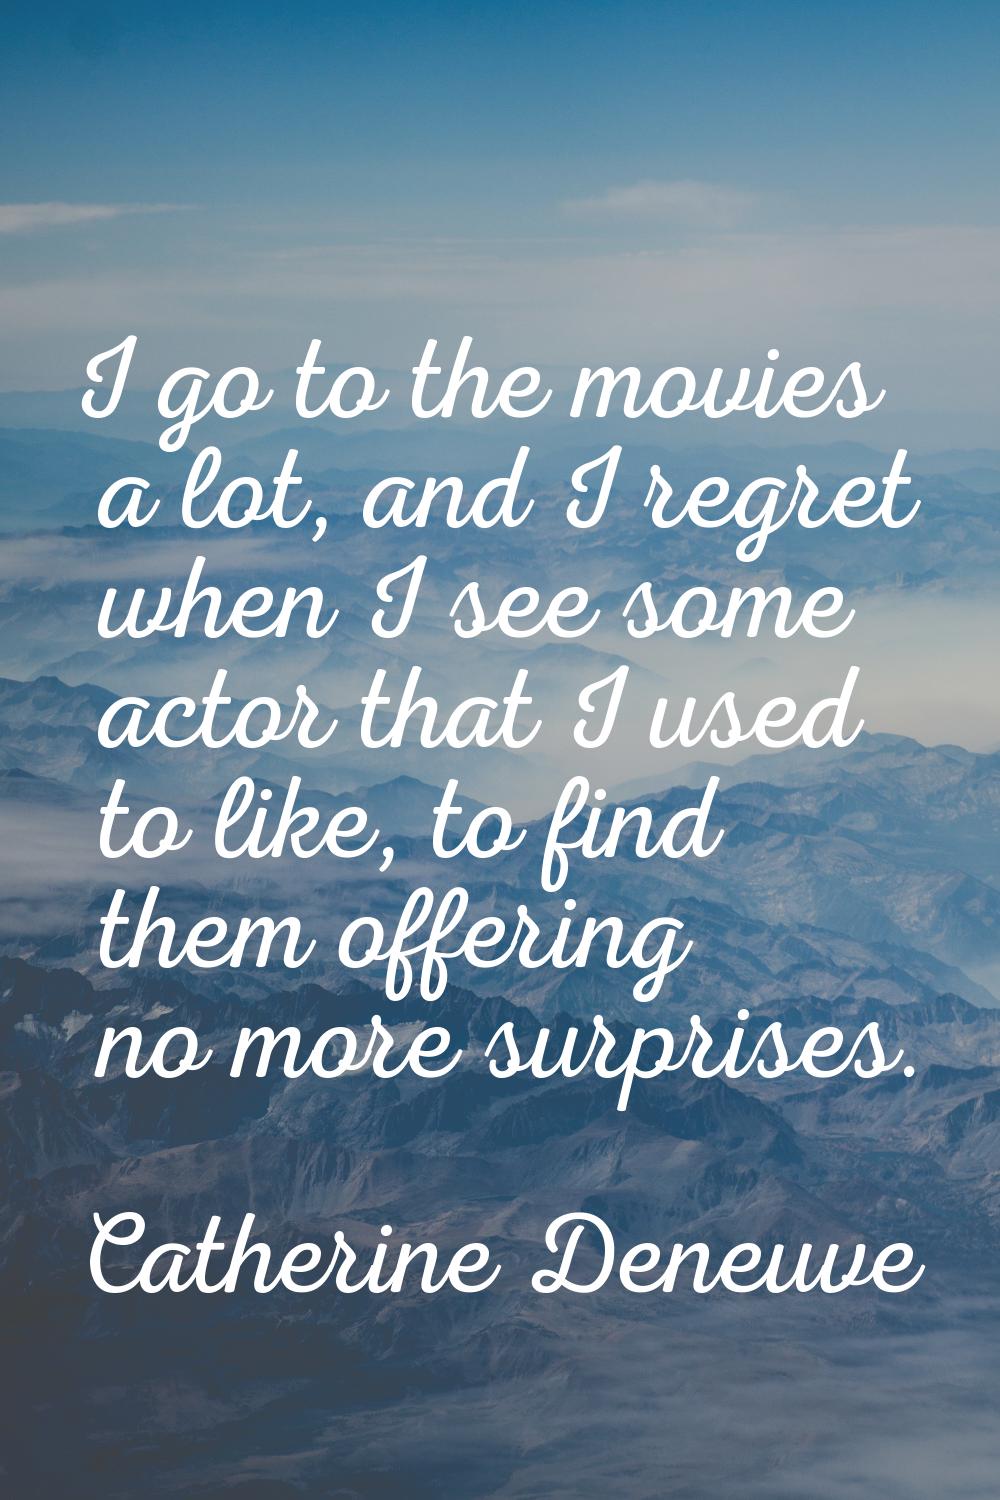 I go to the movies a lot, and I regret when I see some actor that I used to like, to find them offe